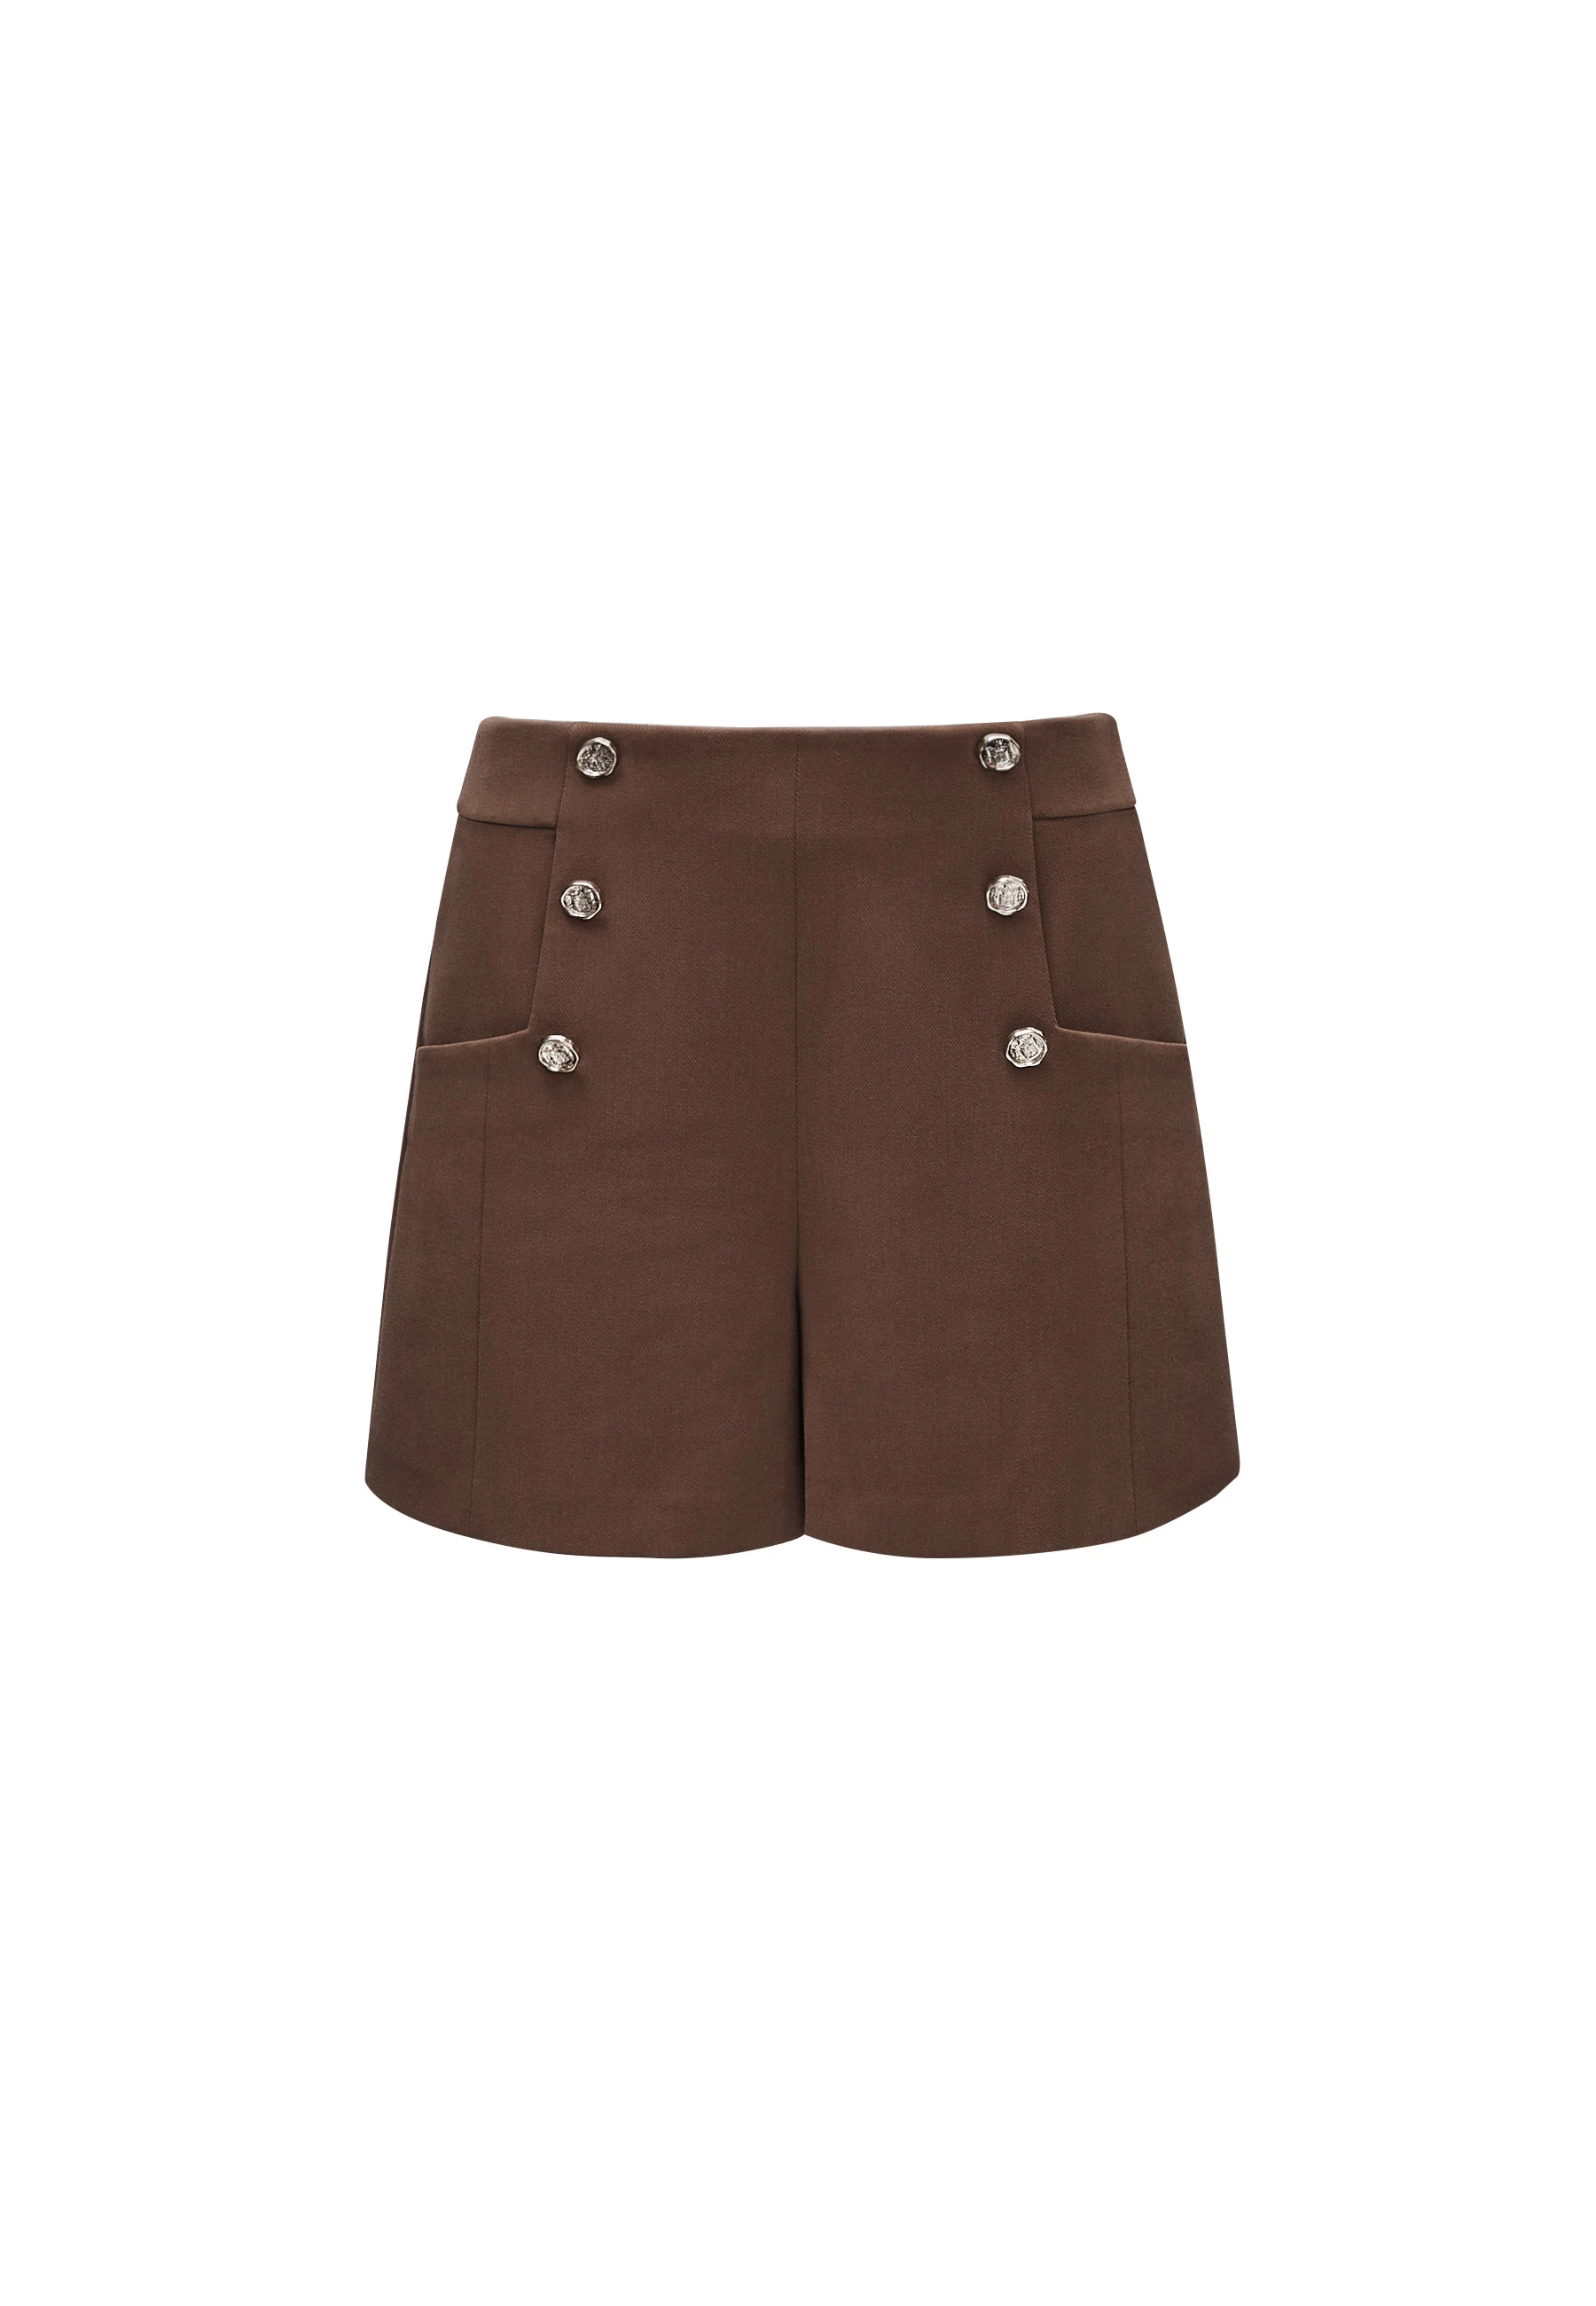 BROWN SHORTS WITH BUTTONS